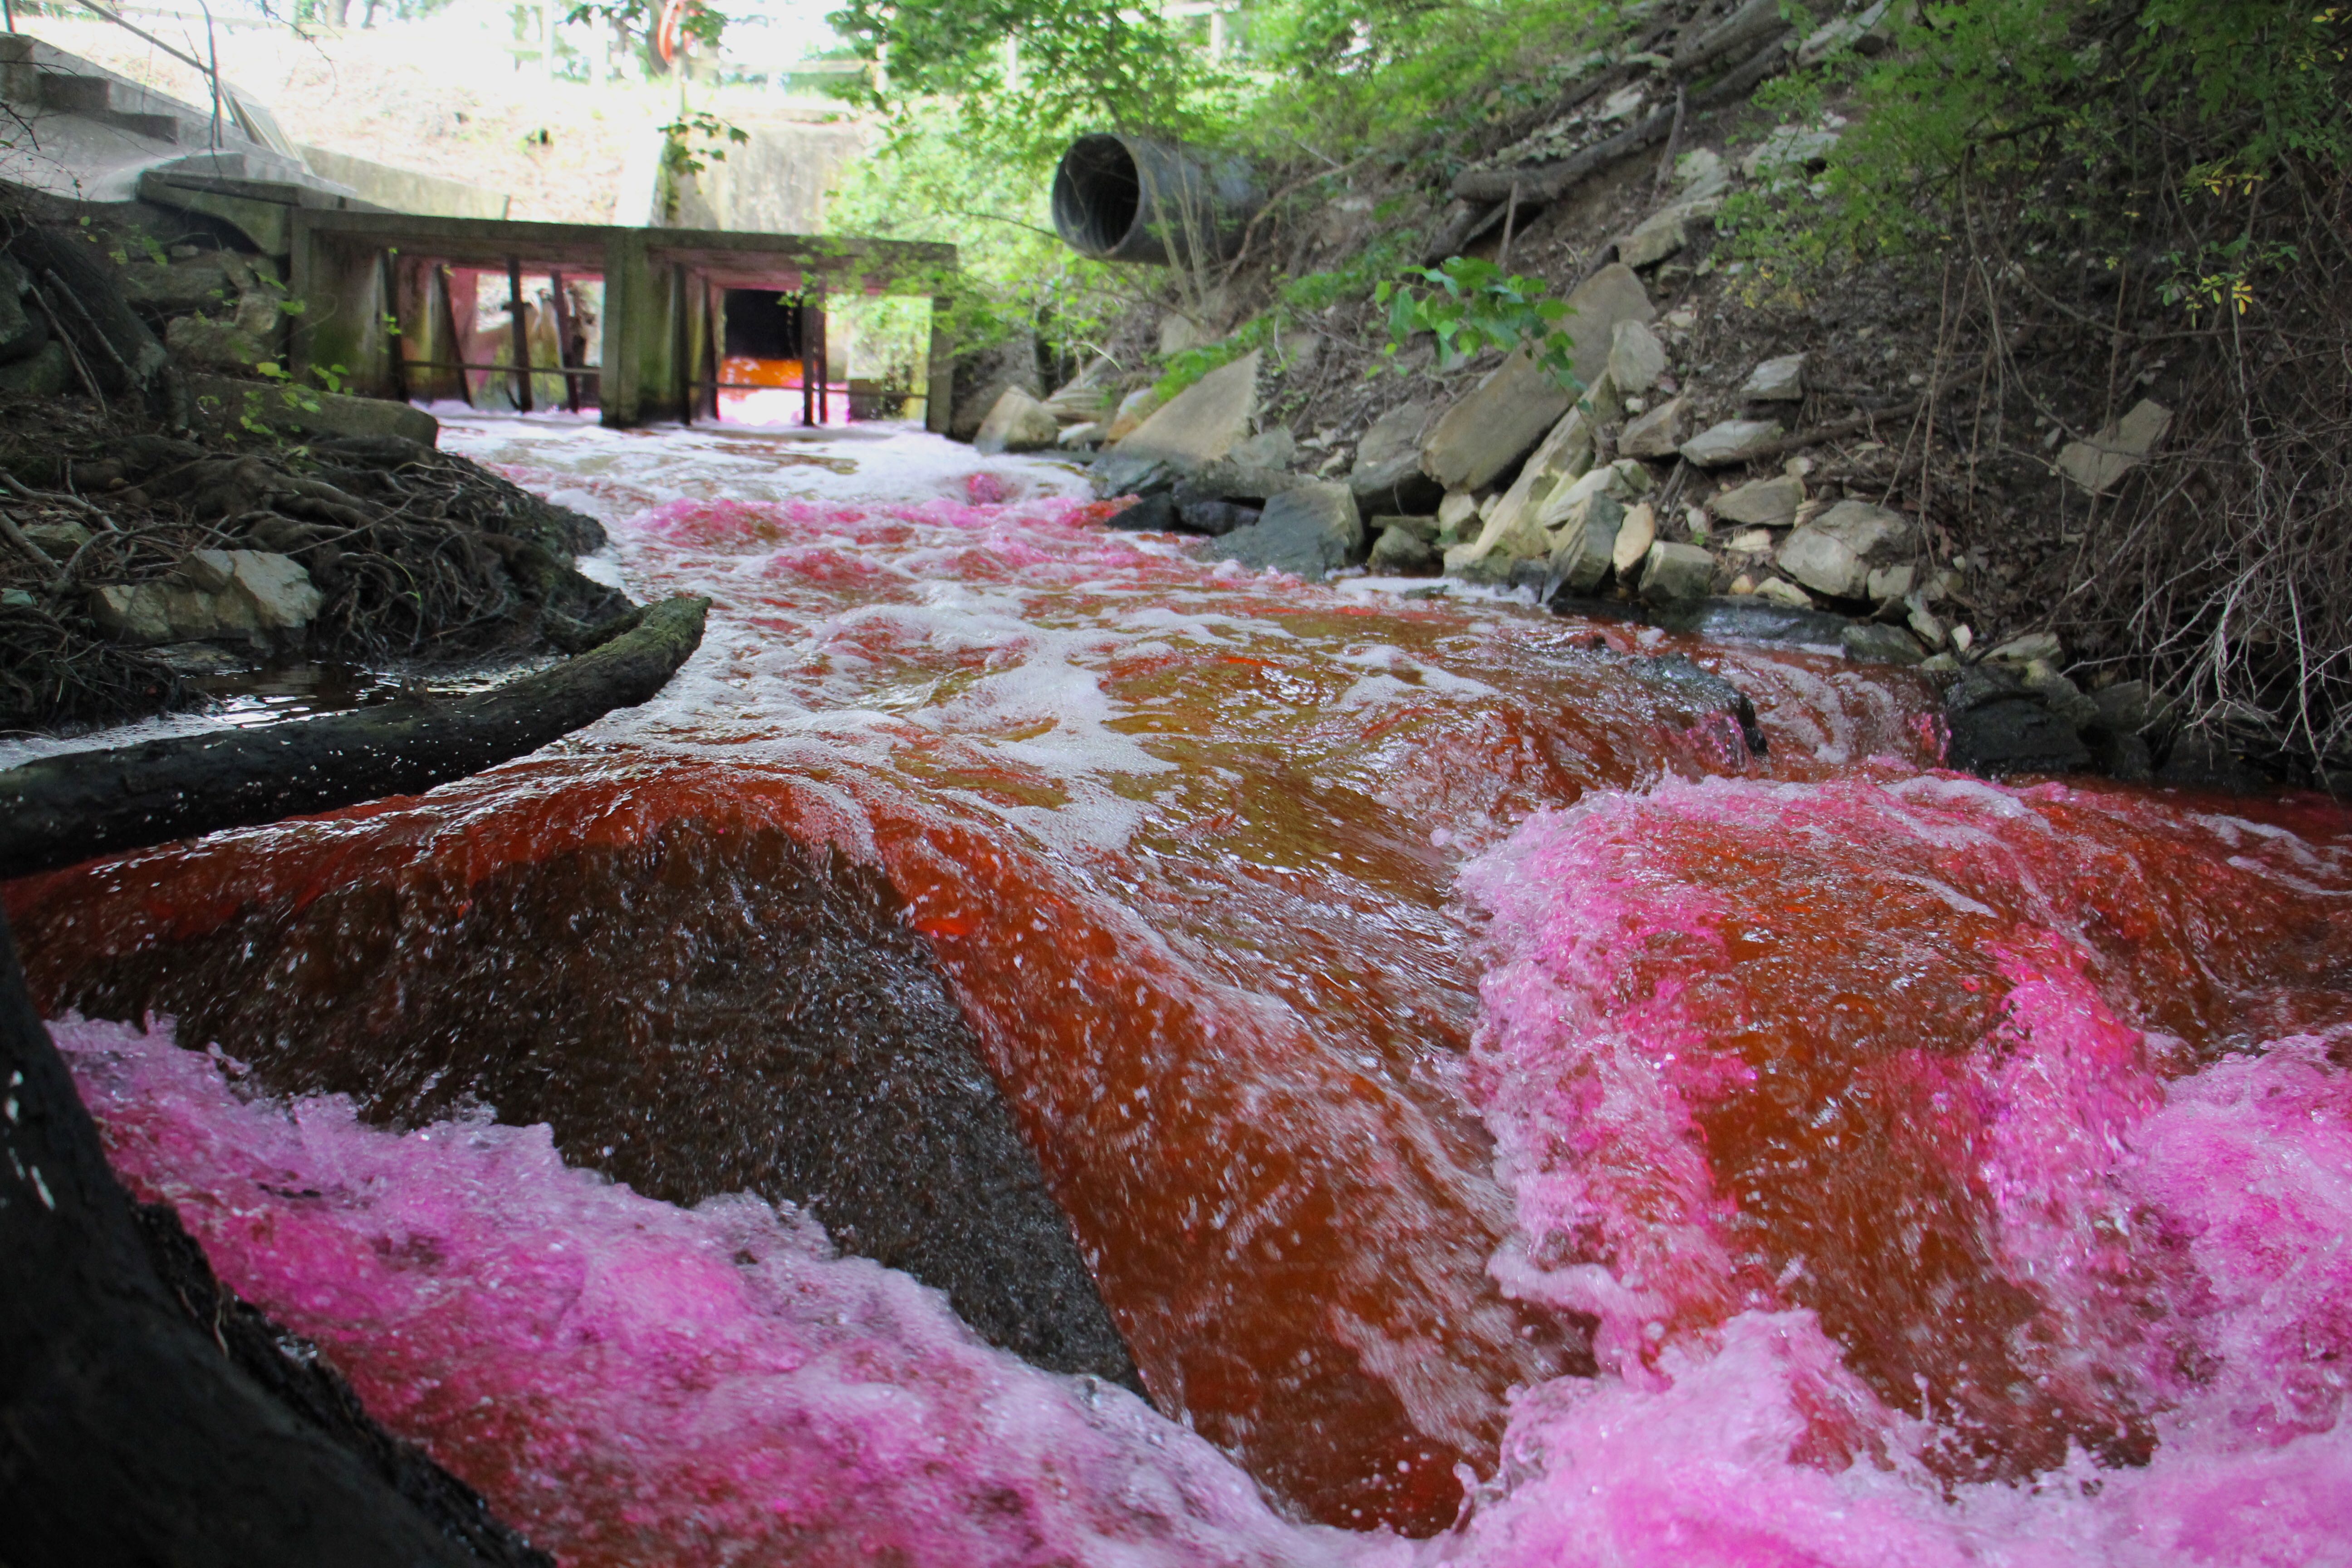 Protecting Delaware shellfish by dyeing streams red WHYY